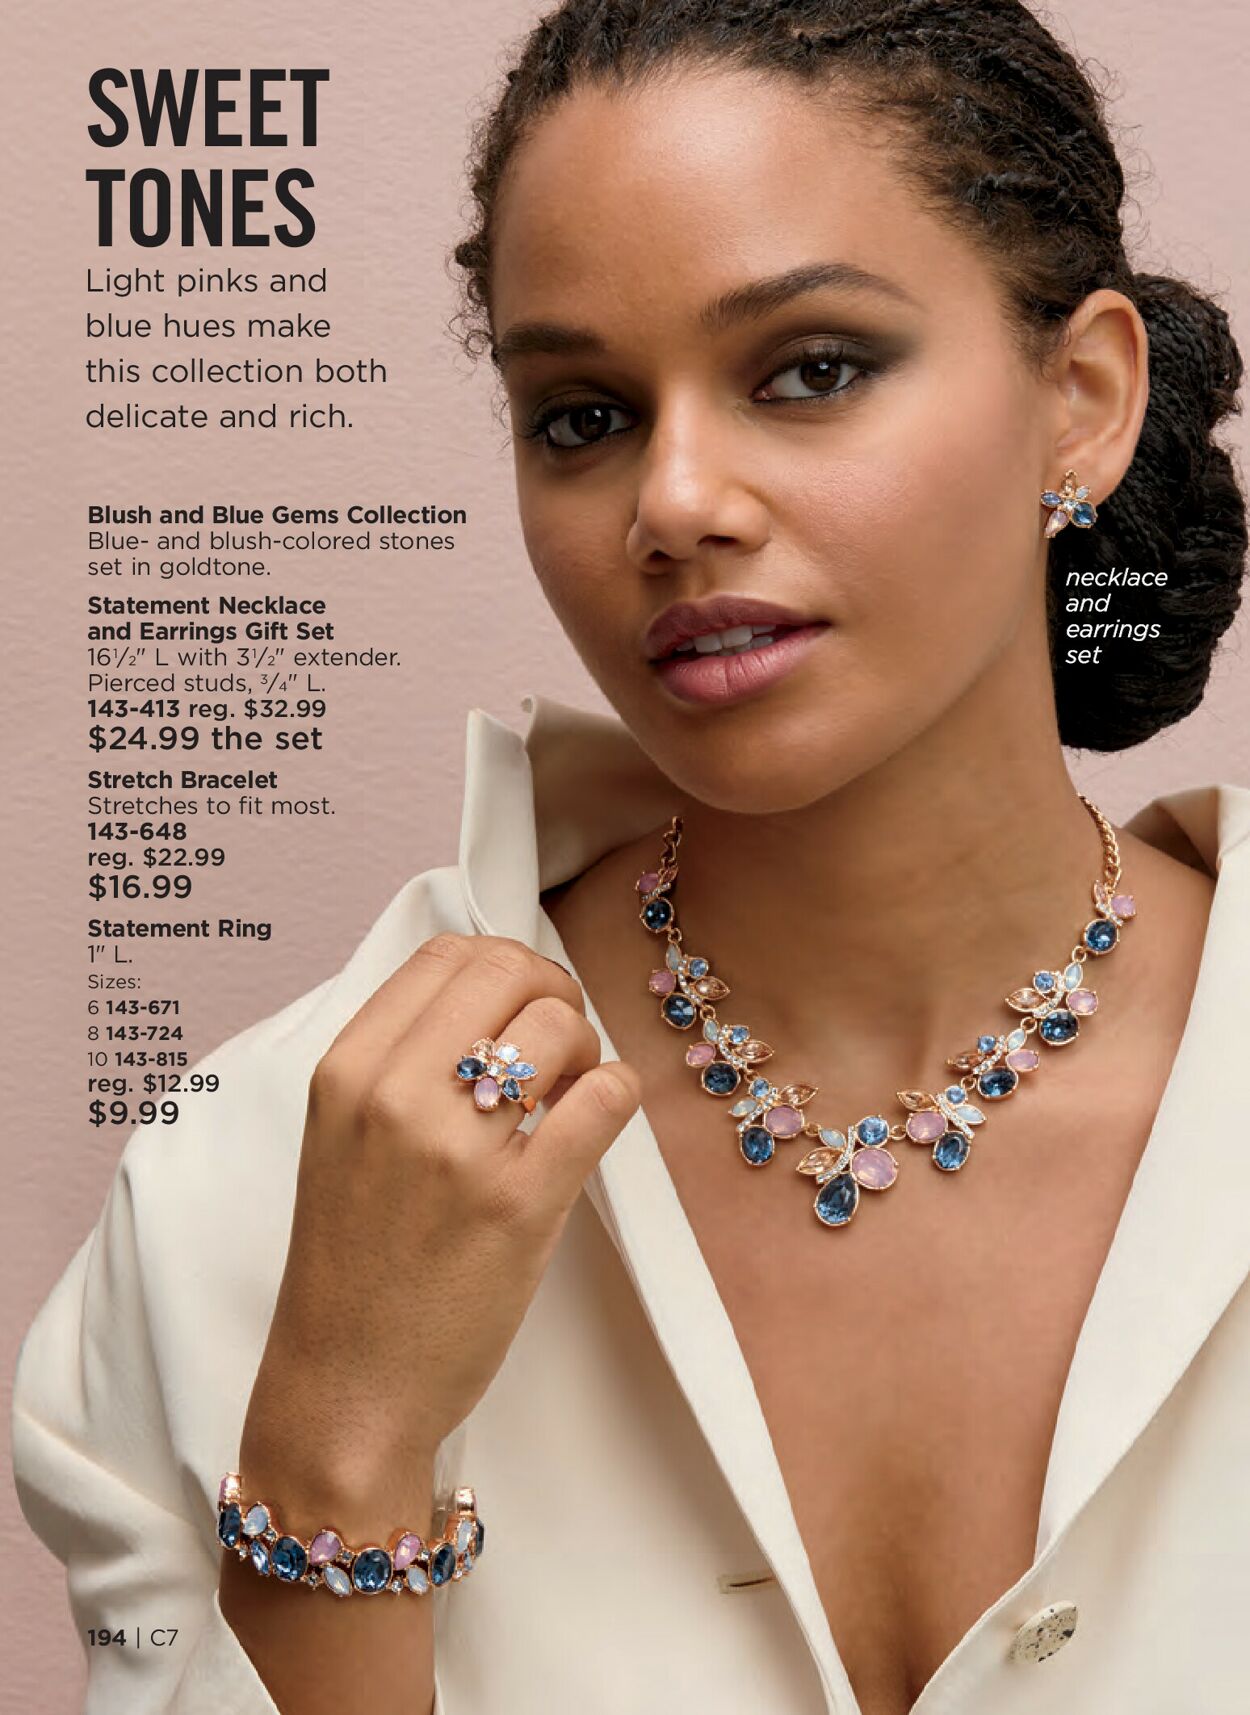 Avon Ad from 04/01/2023